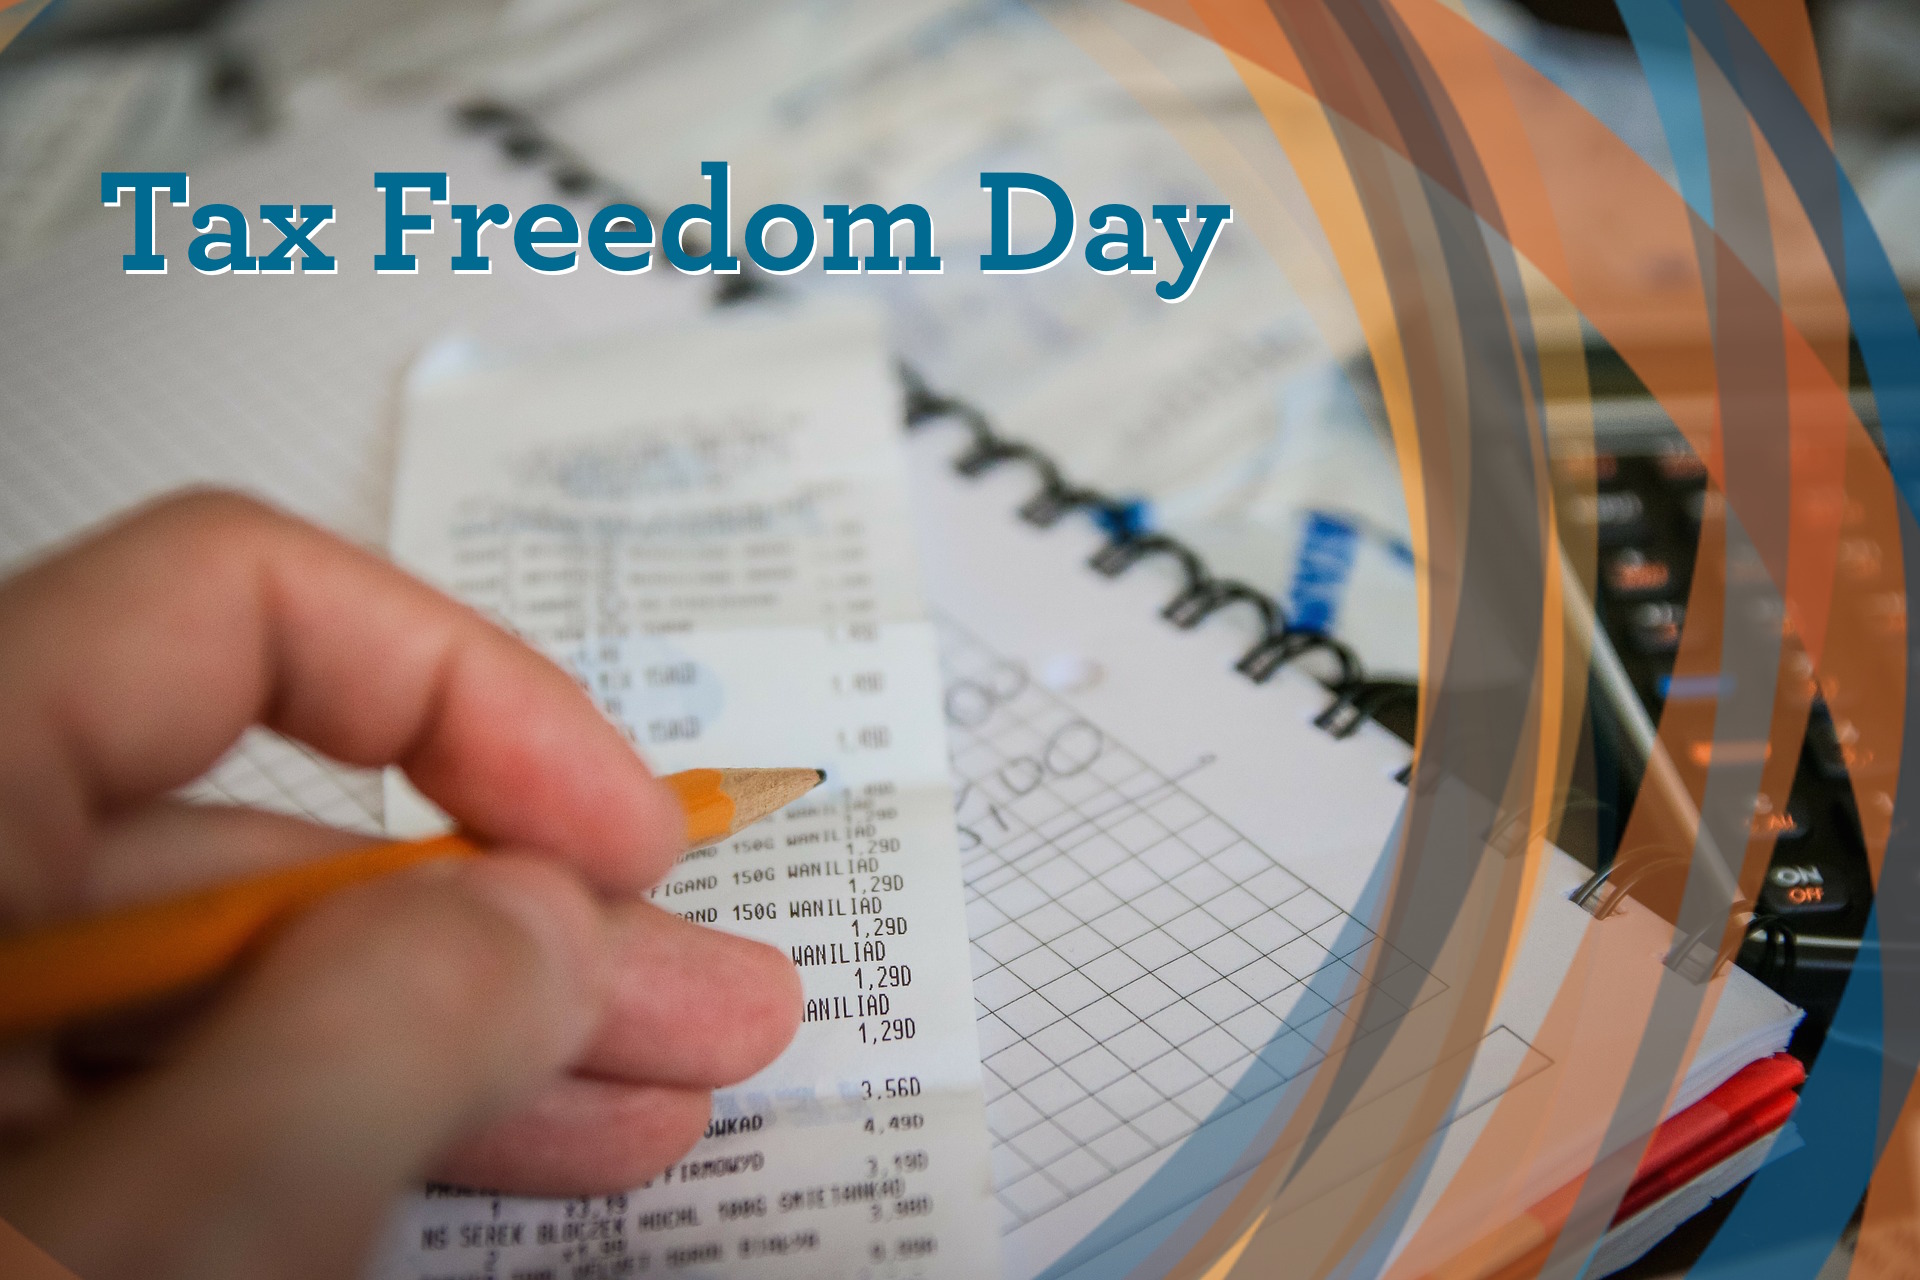 When is Tax Freedom Day in Your State? The Policy Circle